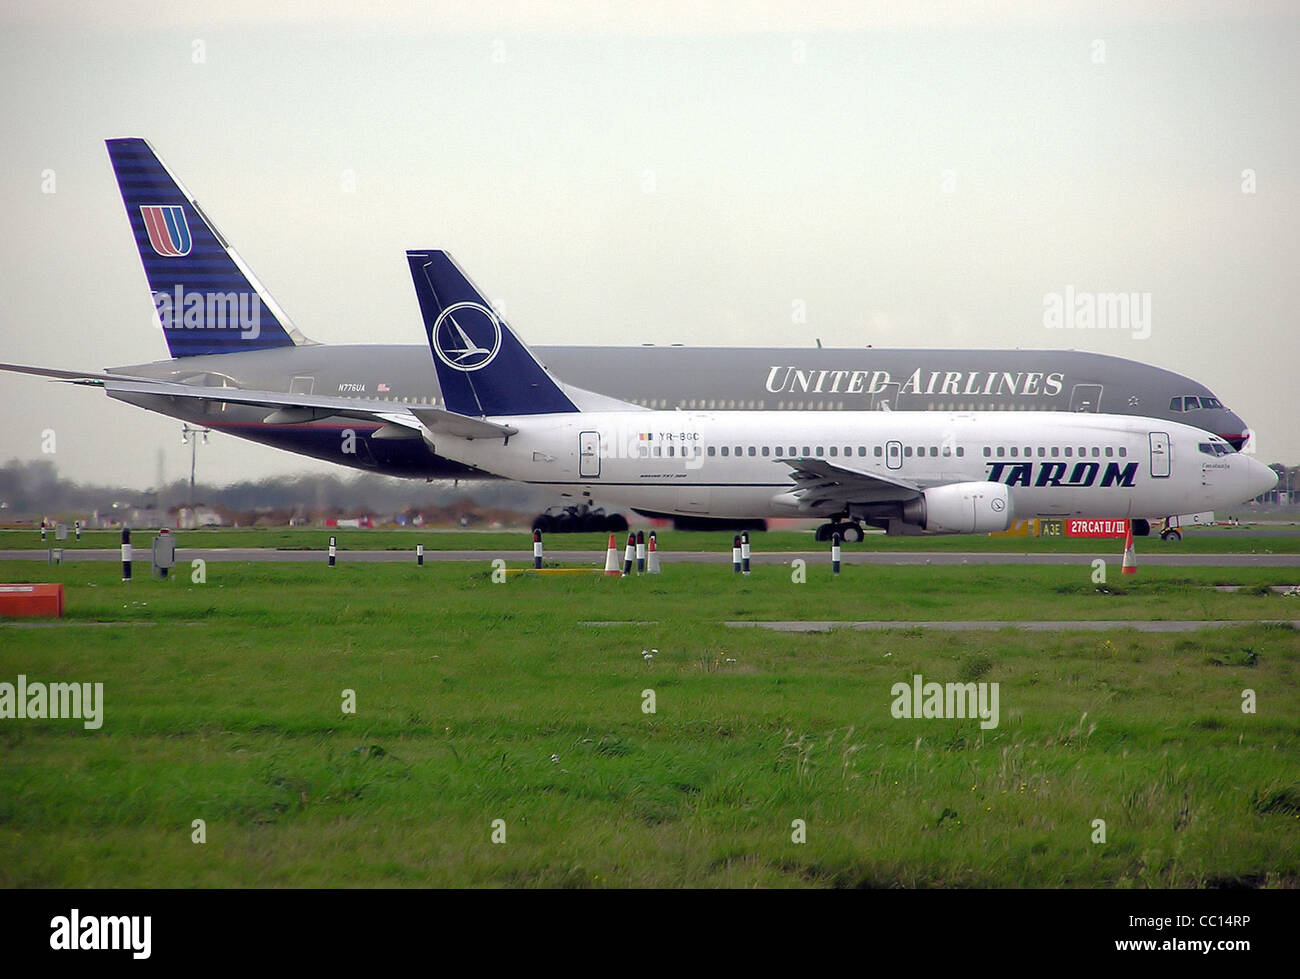 Tarom Boeing 737-300 (YR-BGC) and United Airlines Boeing 777-200 (N776UA) taxiing side by side at London Heathrow Airport, Engla Stock Photo